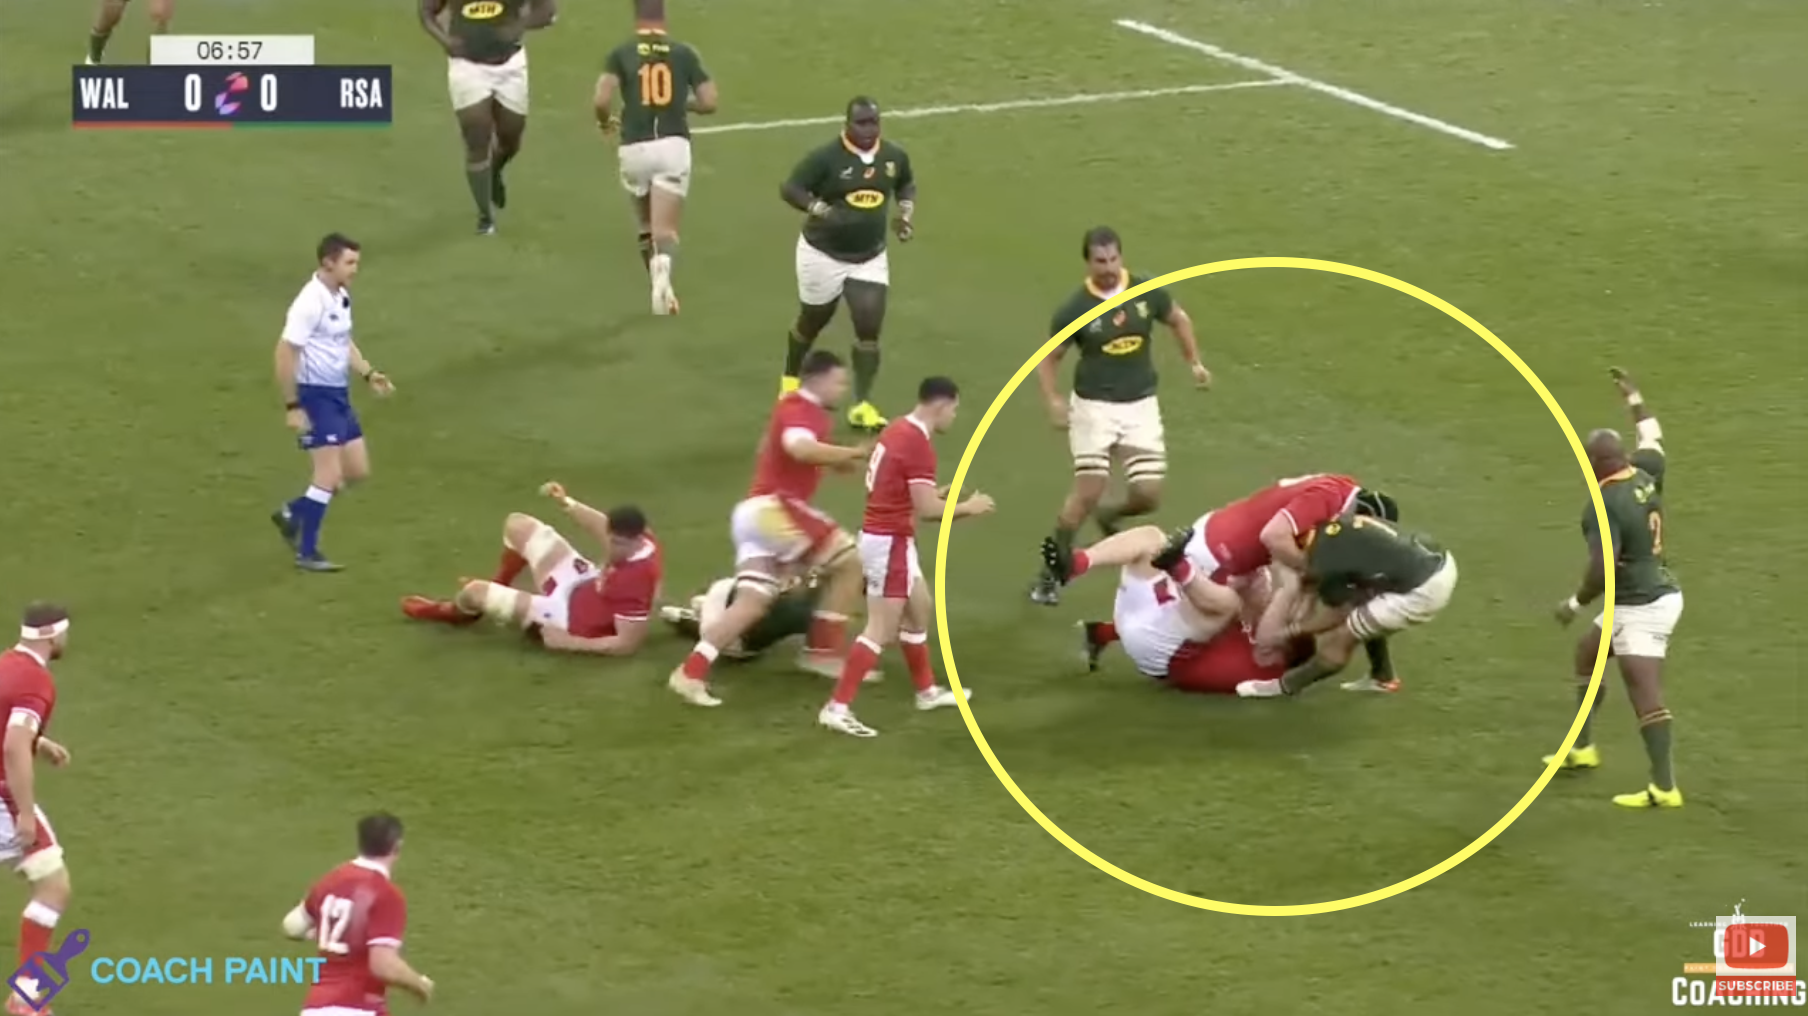 Analyst shows why the jackal is one of the Springboks' greatest weapons